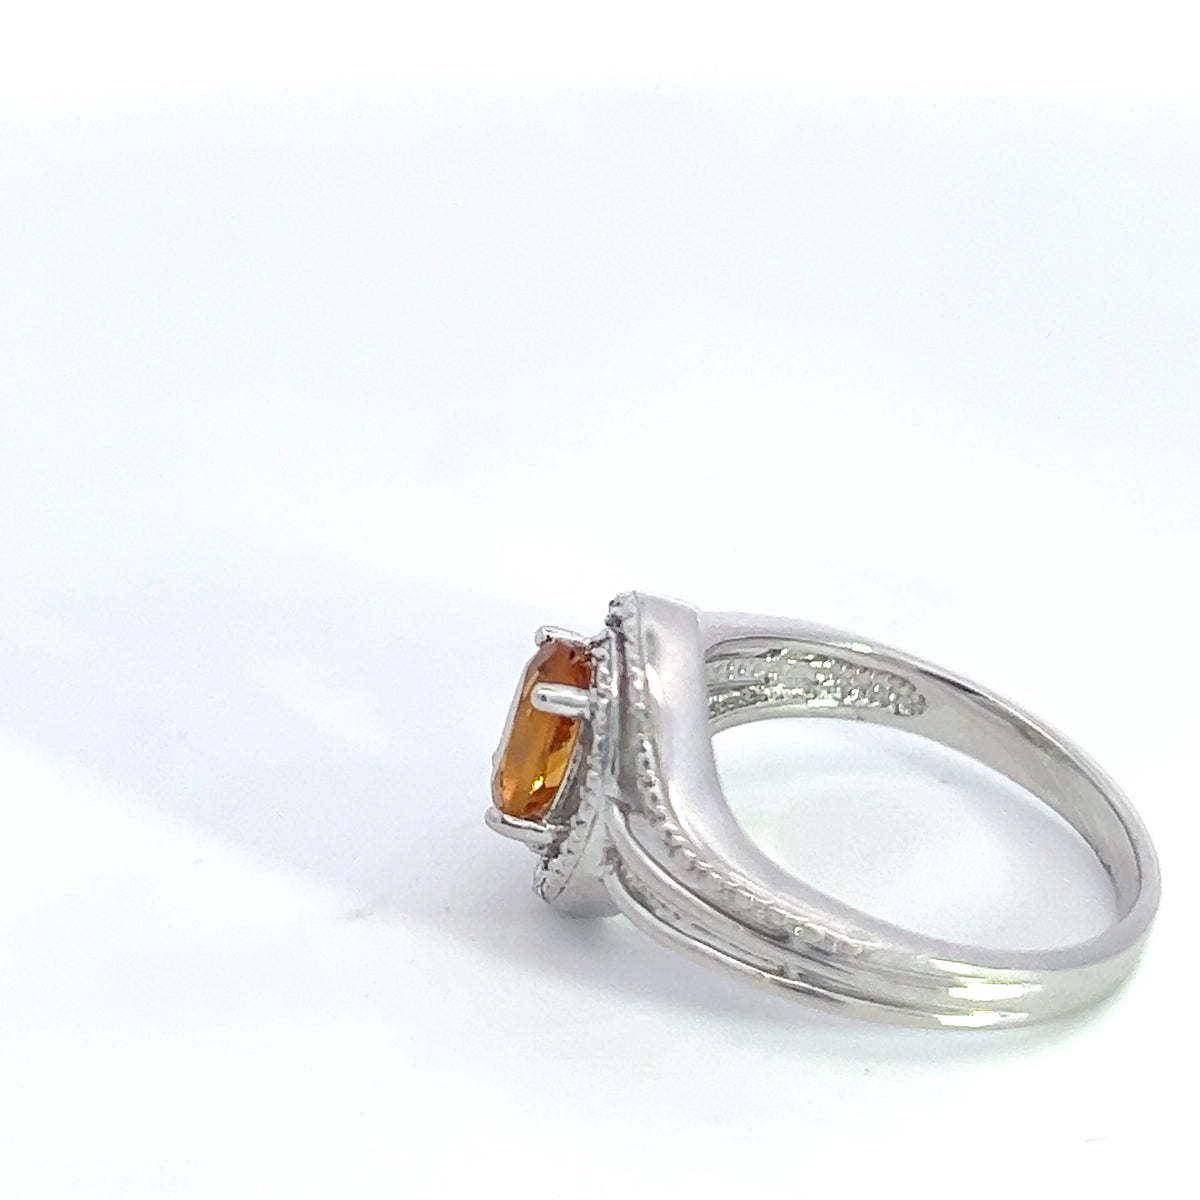 925 Sterling Silver 7 x 5mm Citrine and 0.03cttw Diamond Ring - Size 6